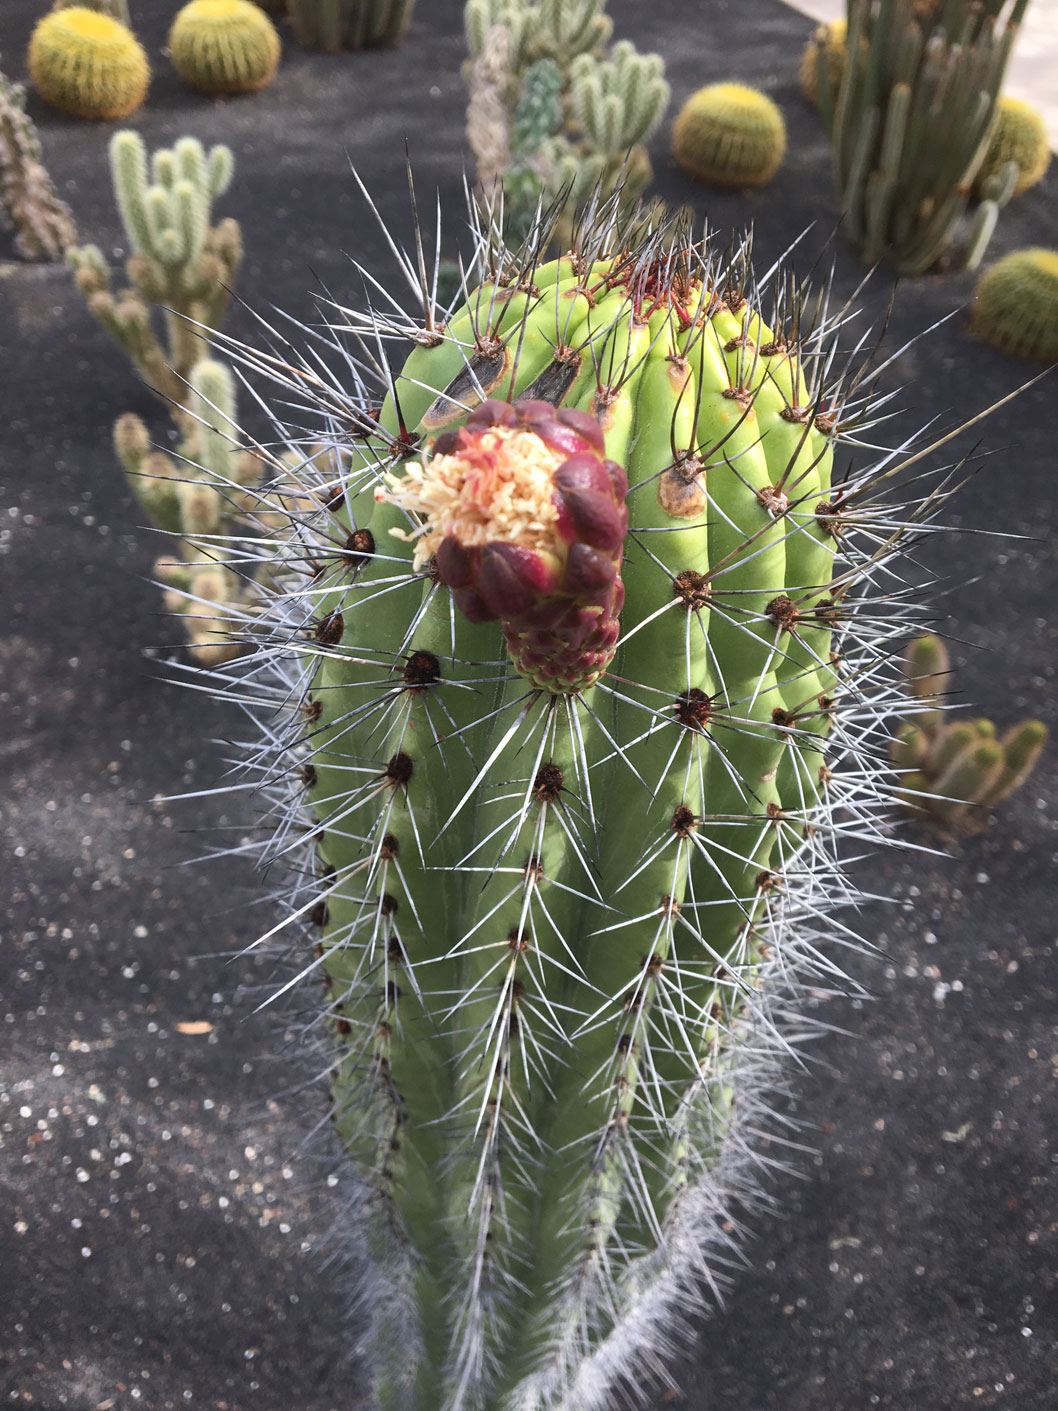 An emerging bud of the Organ Pipe Cactus